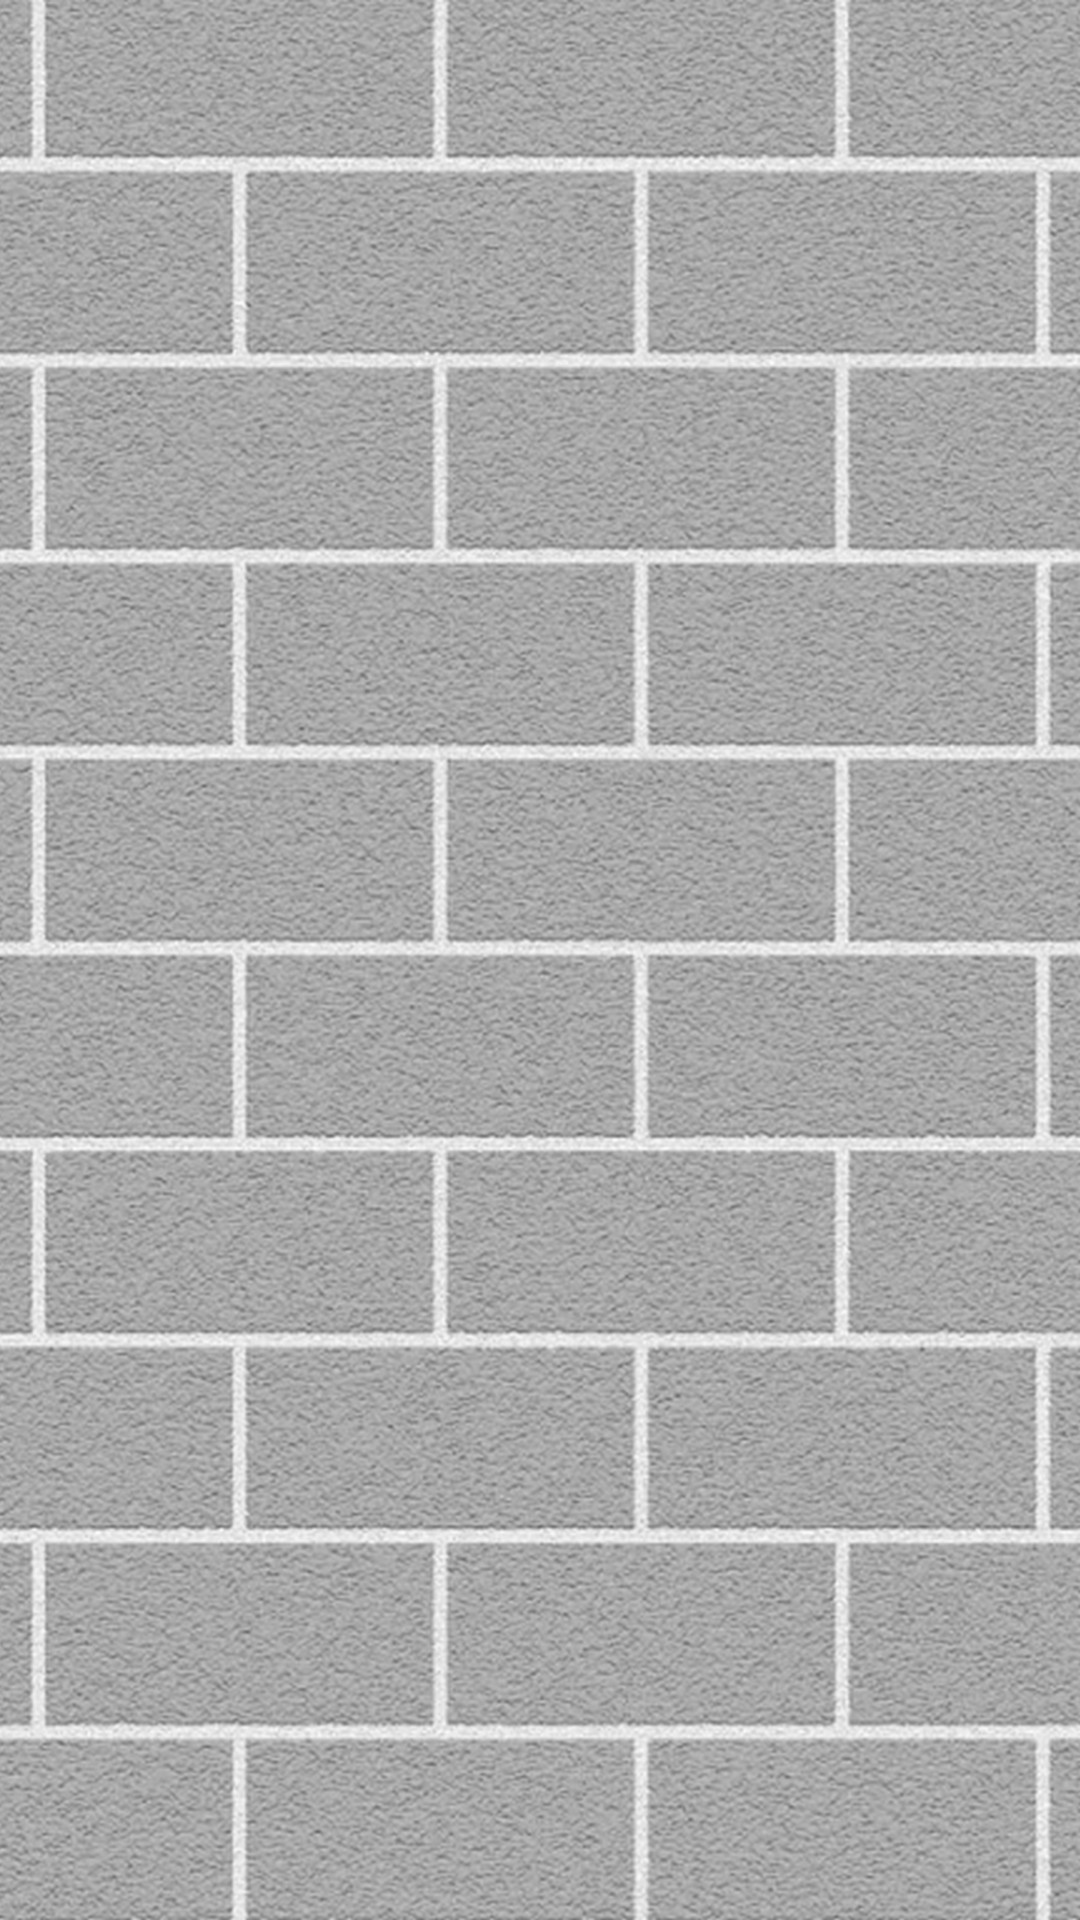 Brick Wallpaper iPhone With high-resolution 1080X1920 pixel. You can use this wallpaper for your iPhone 5, 6, 7, 8, X, XS, XR backgrounds, Mobile Screensaver, or iPad Lock Screen